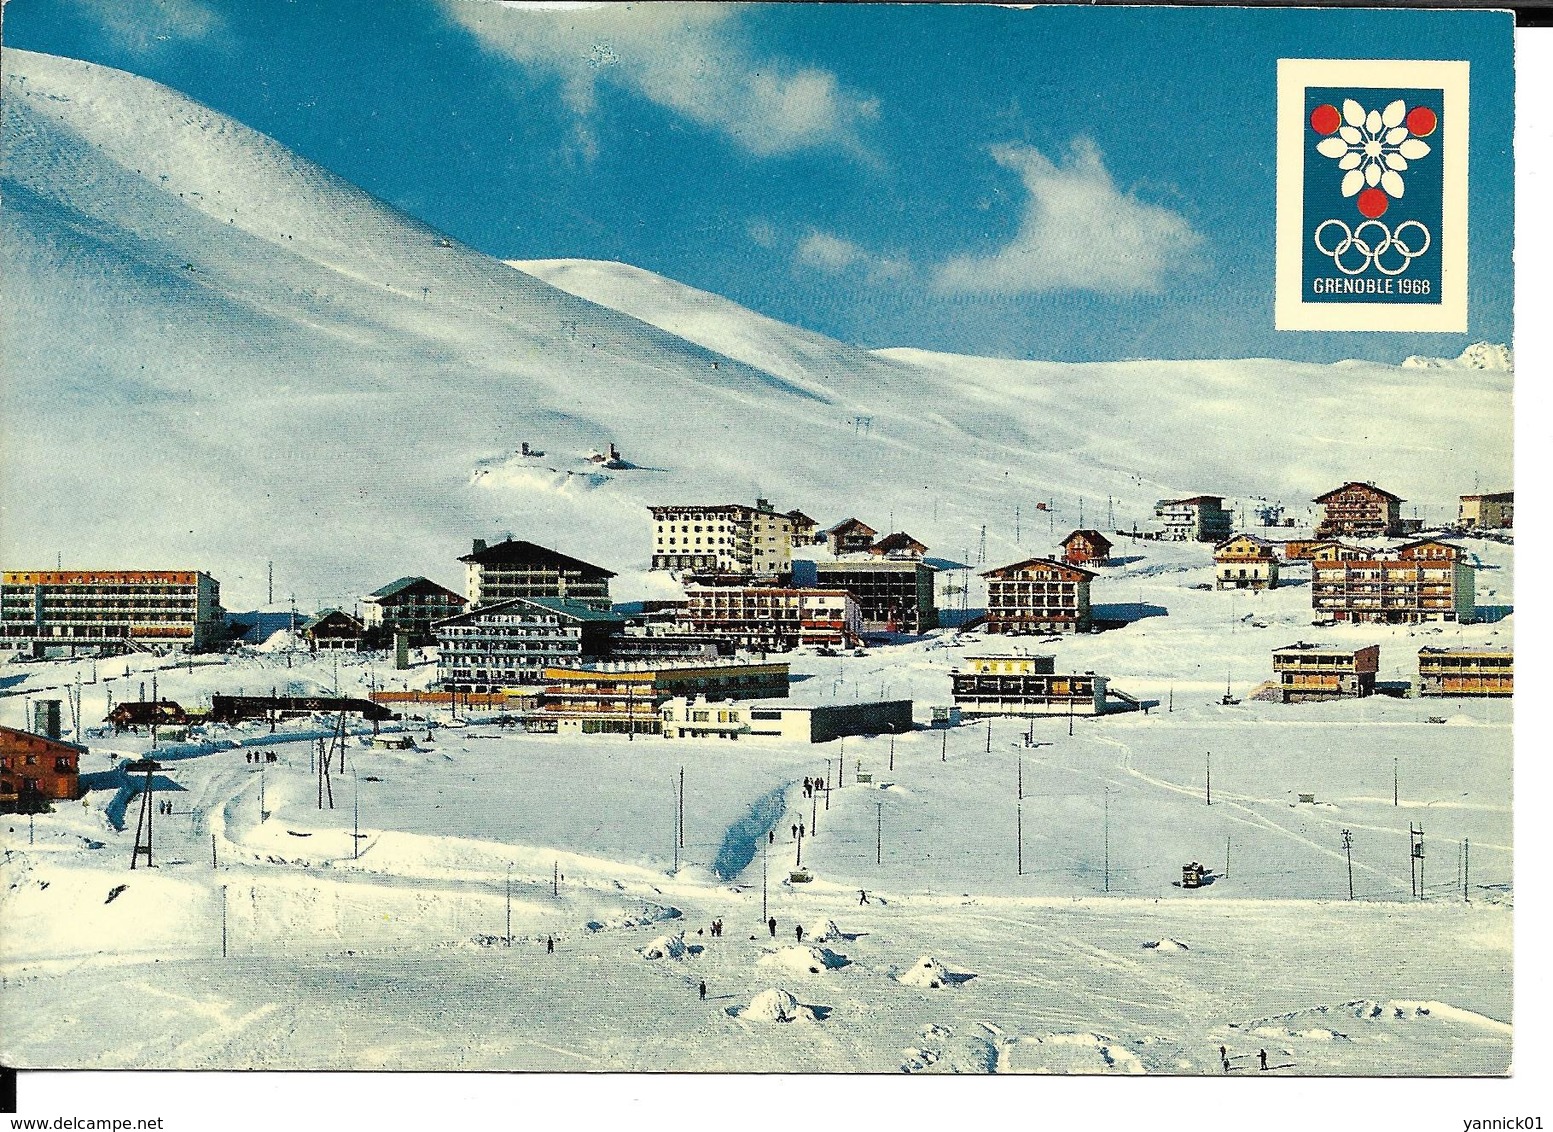 JEUX OLYMPIQUES HIVER GRENOBLE 1968 OLYMPICS WINTER GAMES - STATION ALPE HUEZ - Jeux Olympiques